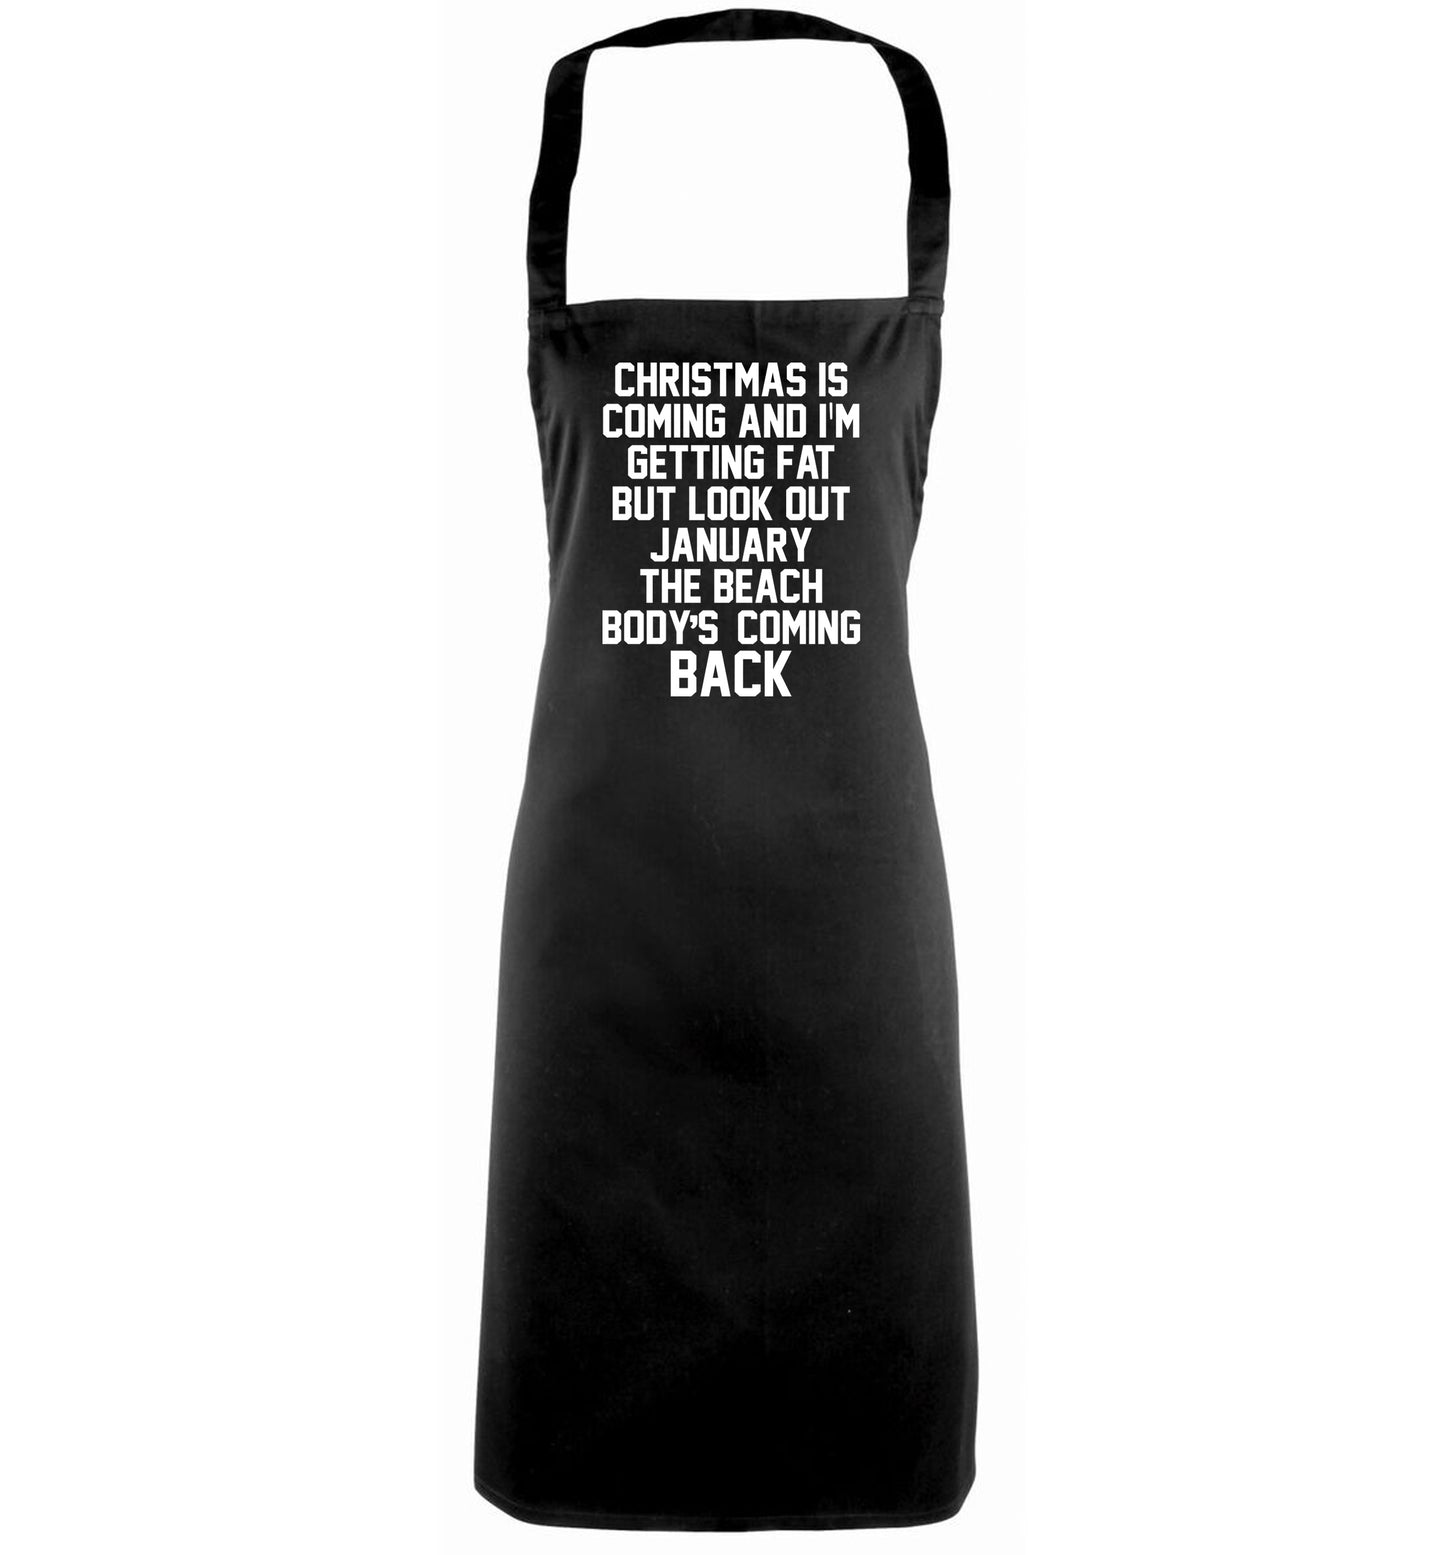 Christmas is coming and I'm getting fat but look out January the beach body's coming back! black apron